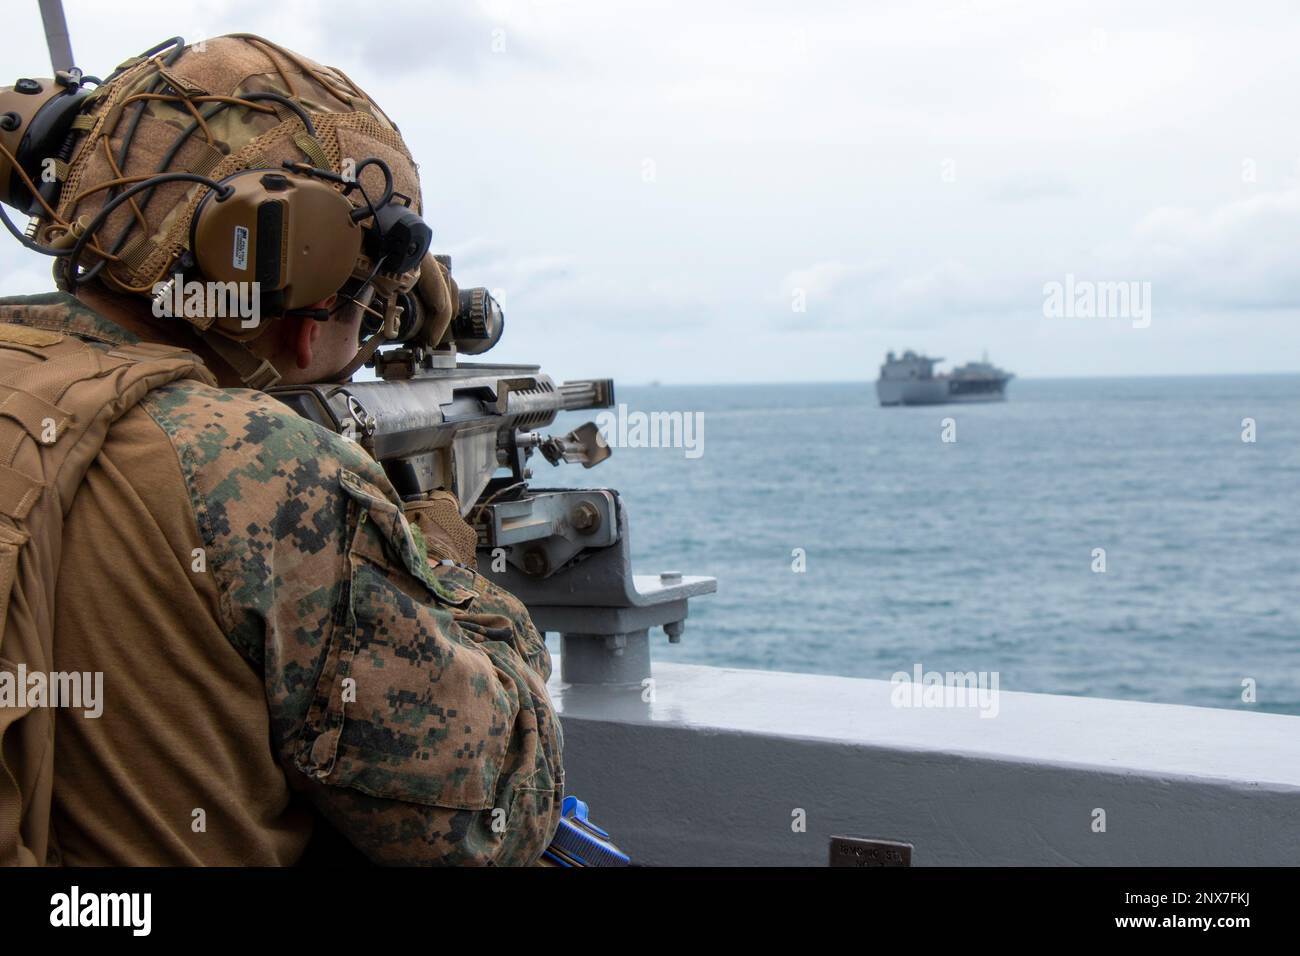 NATUNA SEA (Jan. 7, 2023) – A Marine assigned to a Surveillance and Target Acquisition (STA) platoon embarked aboard amphibious transport dock USS Anchorage (LPD 23) watches over Marines engaged in a Visit, Board, Search, and Seizure (VBSS) training exercise aboard Lewis B. Puller-class expeditionary mobile base USS Miguel Keith (ESB 5), Jan. 7. Synchronizing the complementary capabilities of the 13th Marine Expeditionary Unit (MEU) and USS Anchorage multiplies the traditional influence of sea power to produce a more competitive and lethal force. The Makin Island Amphibious Ready Group, compri Stock Photo